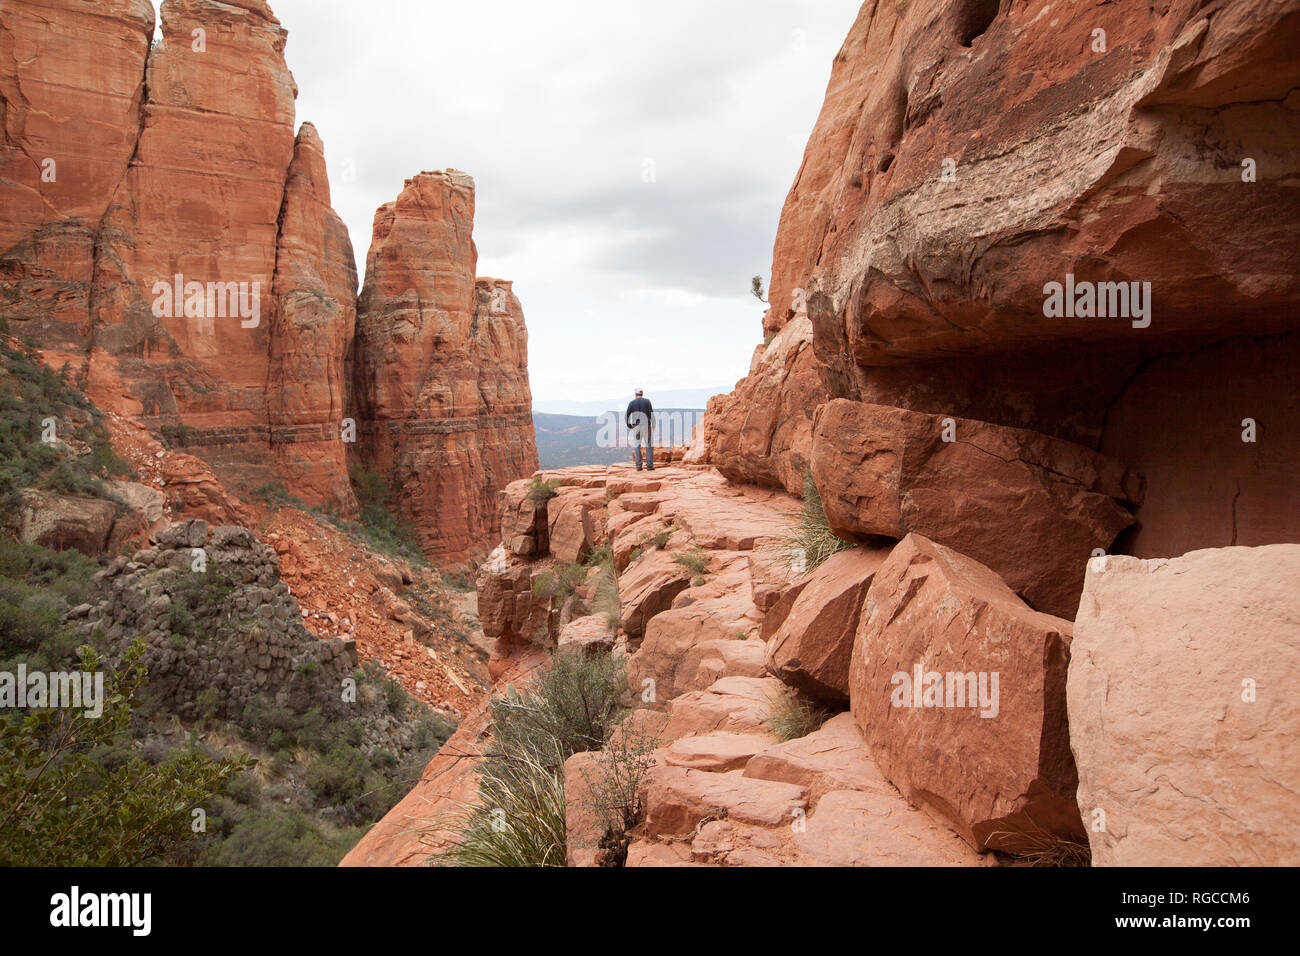 Man hiking to the cliffs edge at cathedral rock trail in Sedona arizona Stock Photo